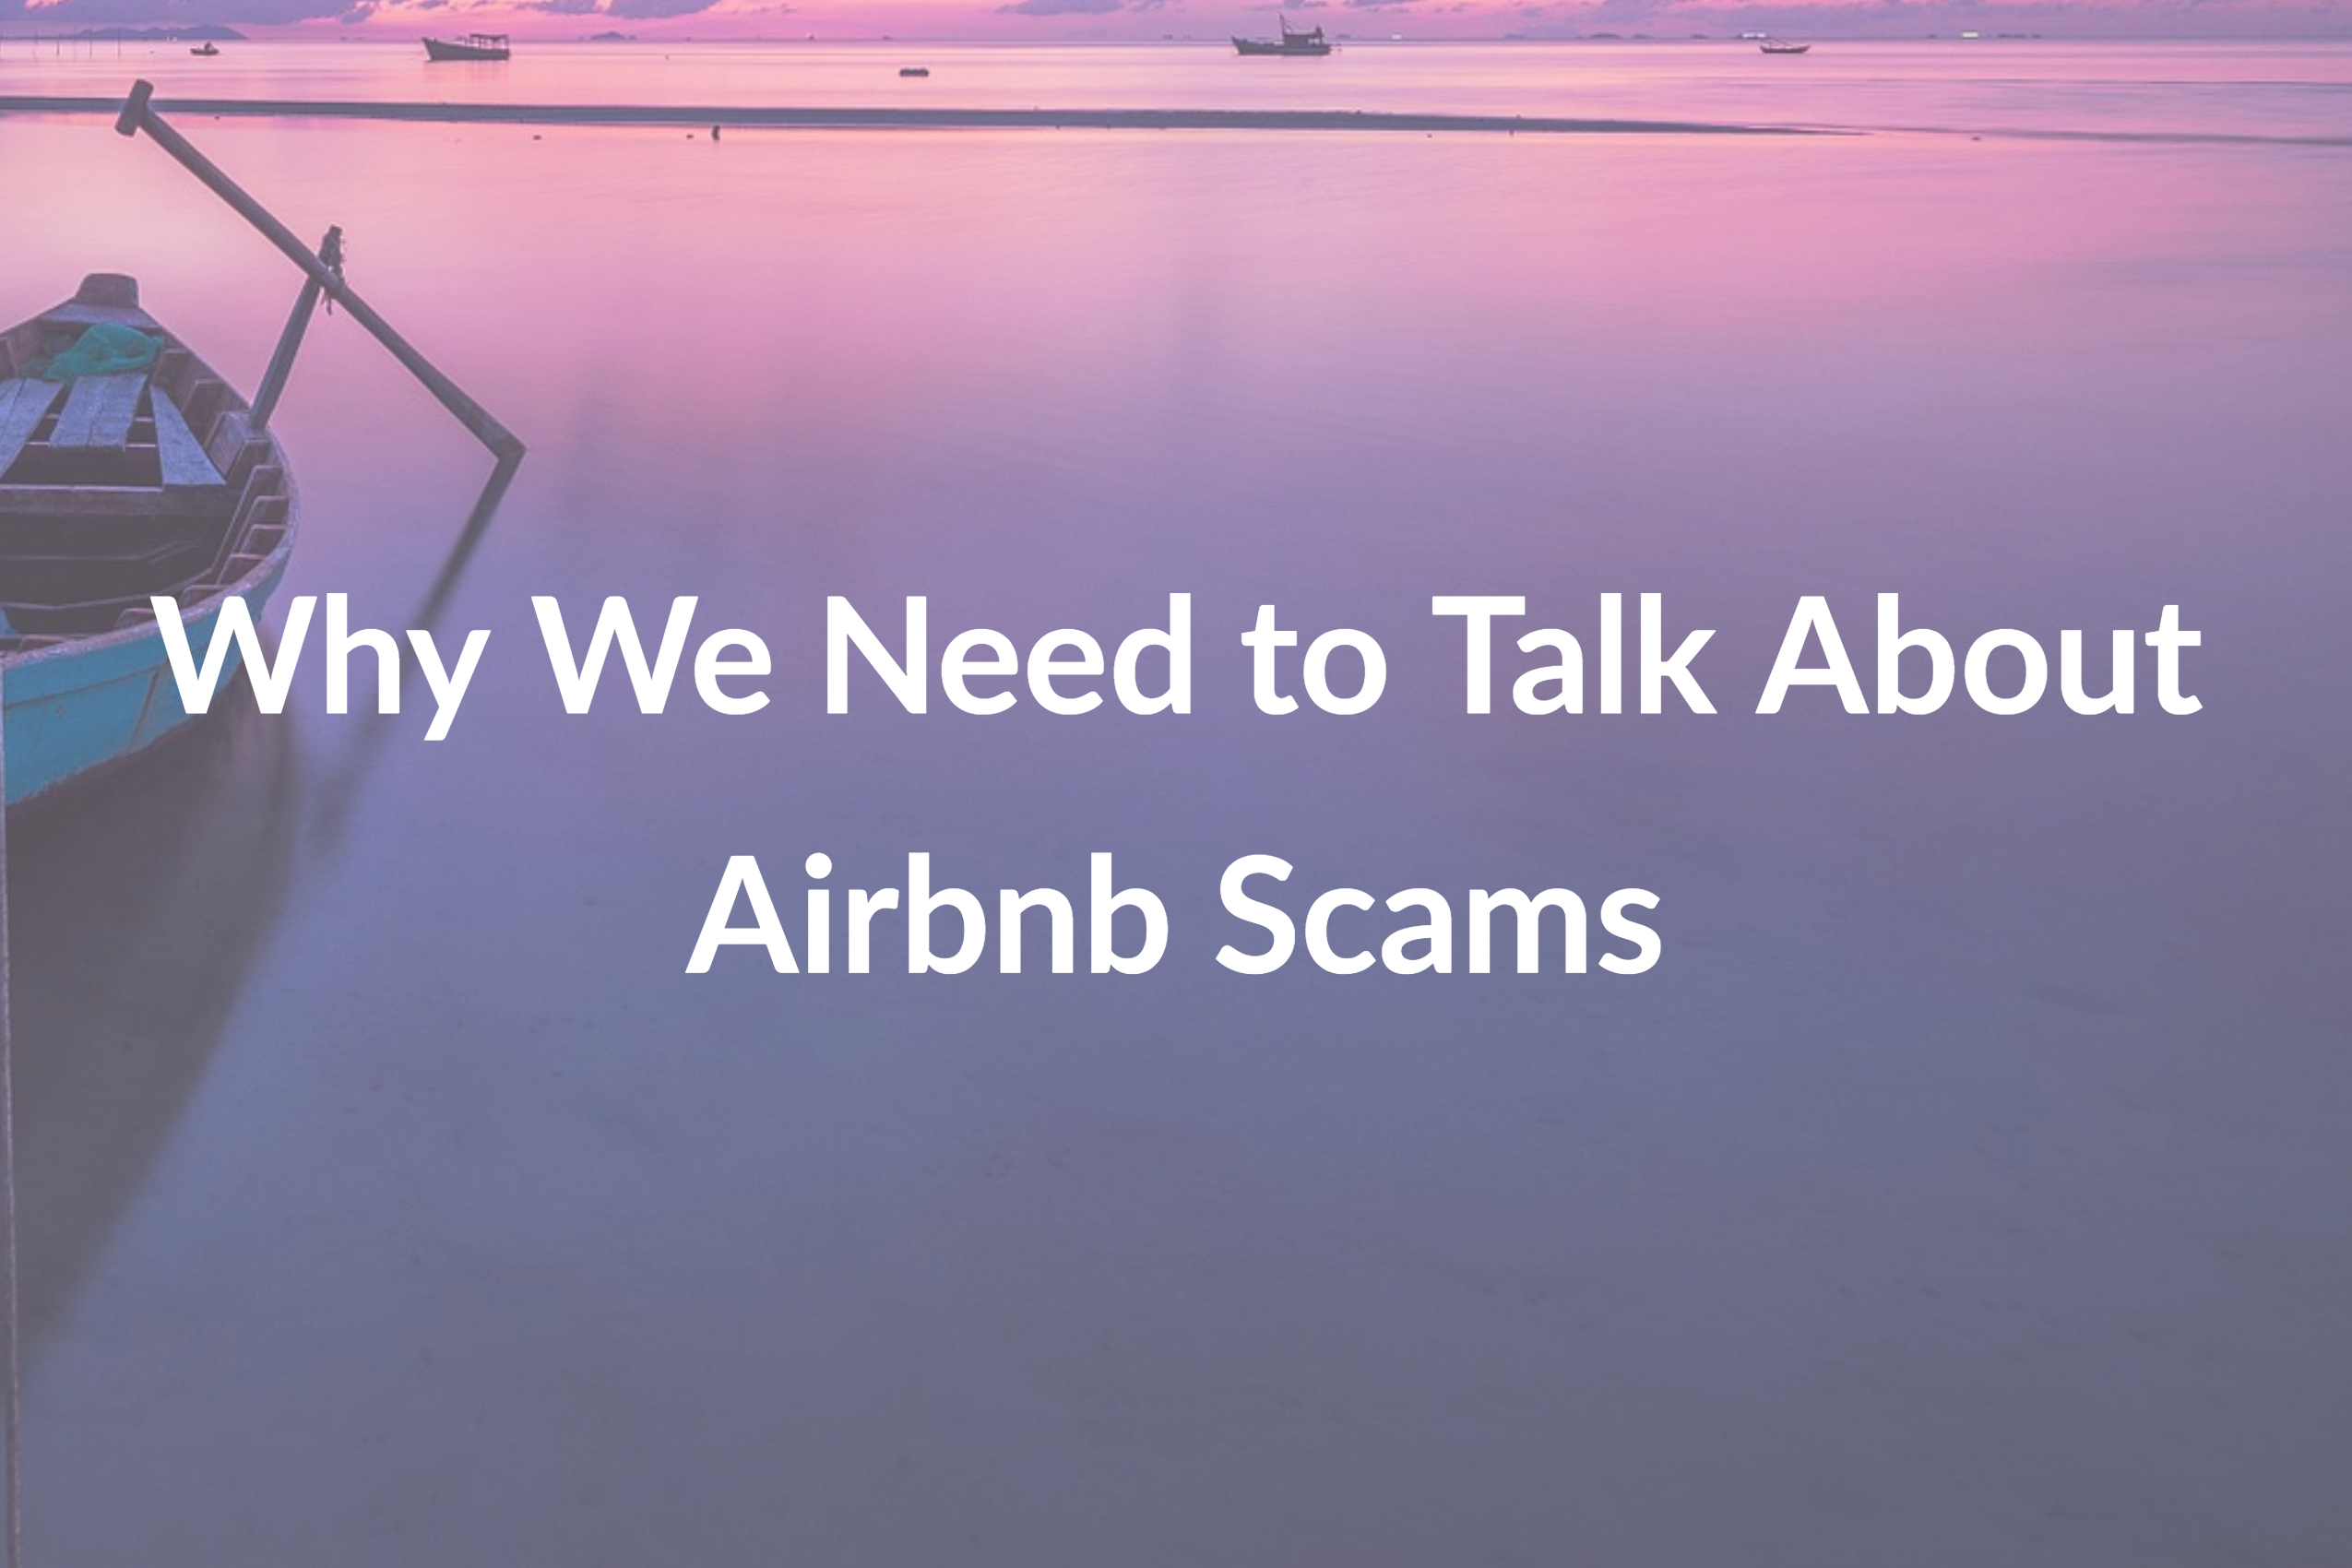 Why We Need to Talk About Airbnb Scams